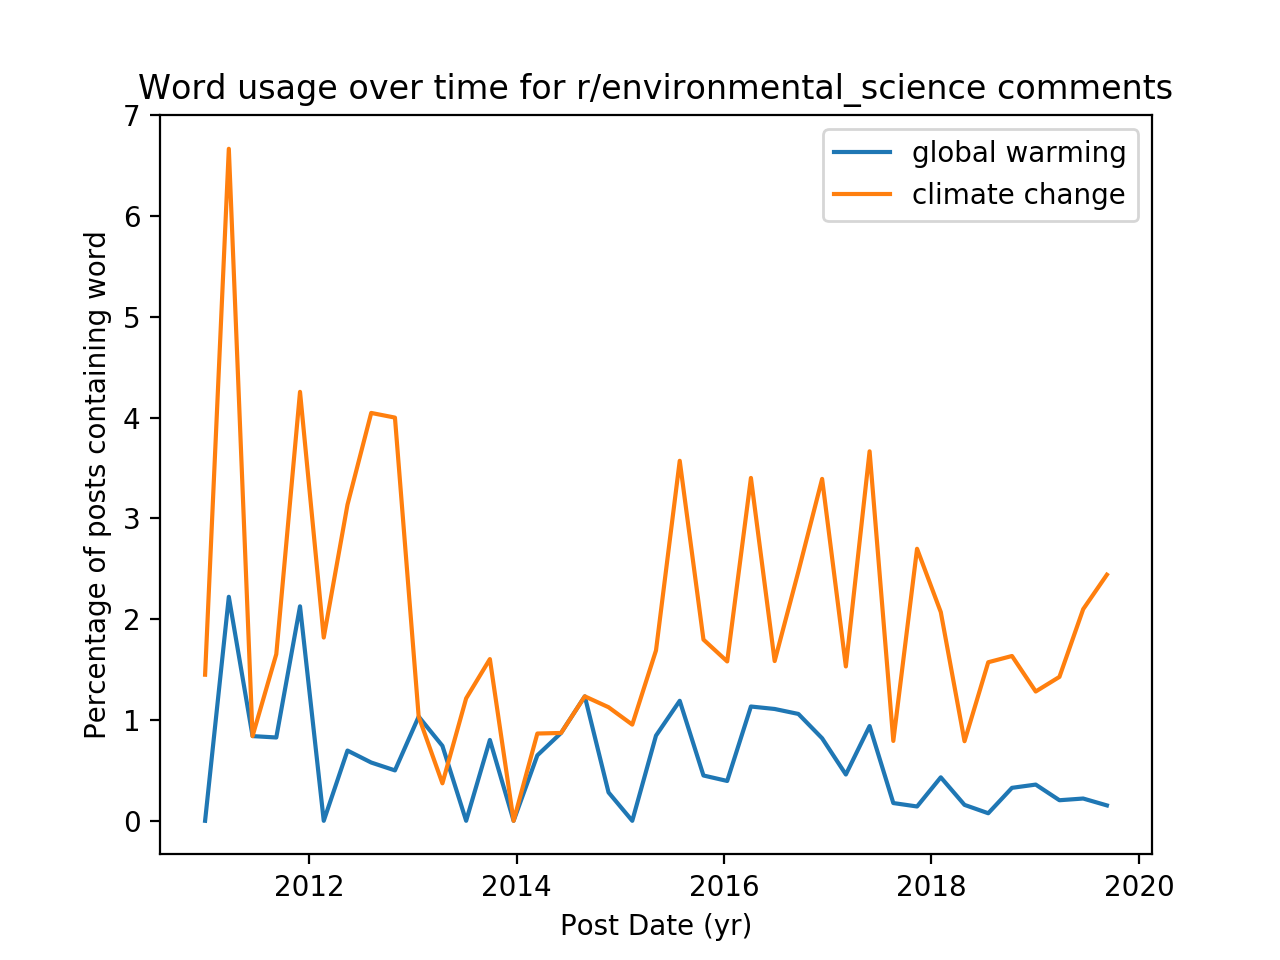 Comments in the subreddit r/environmental_science that mention climate change or global warming